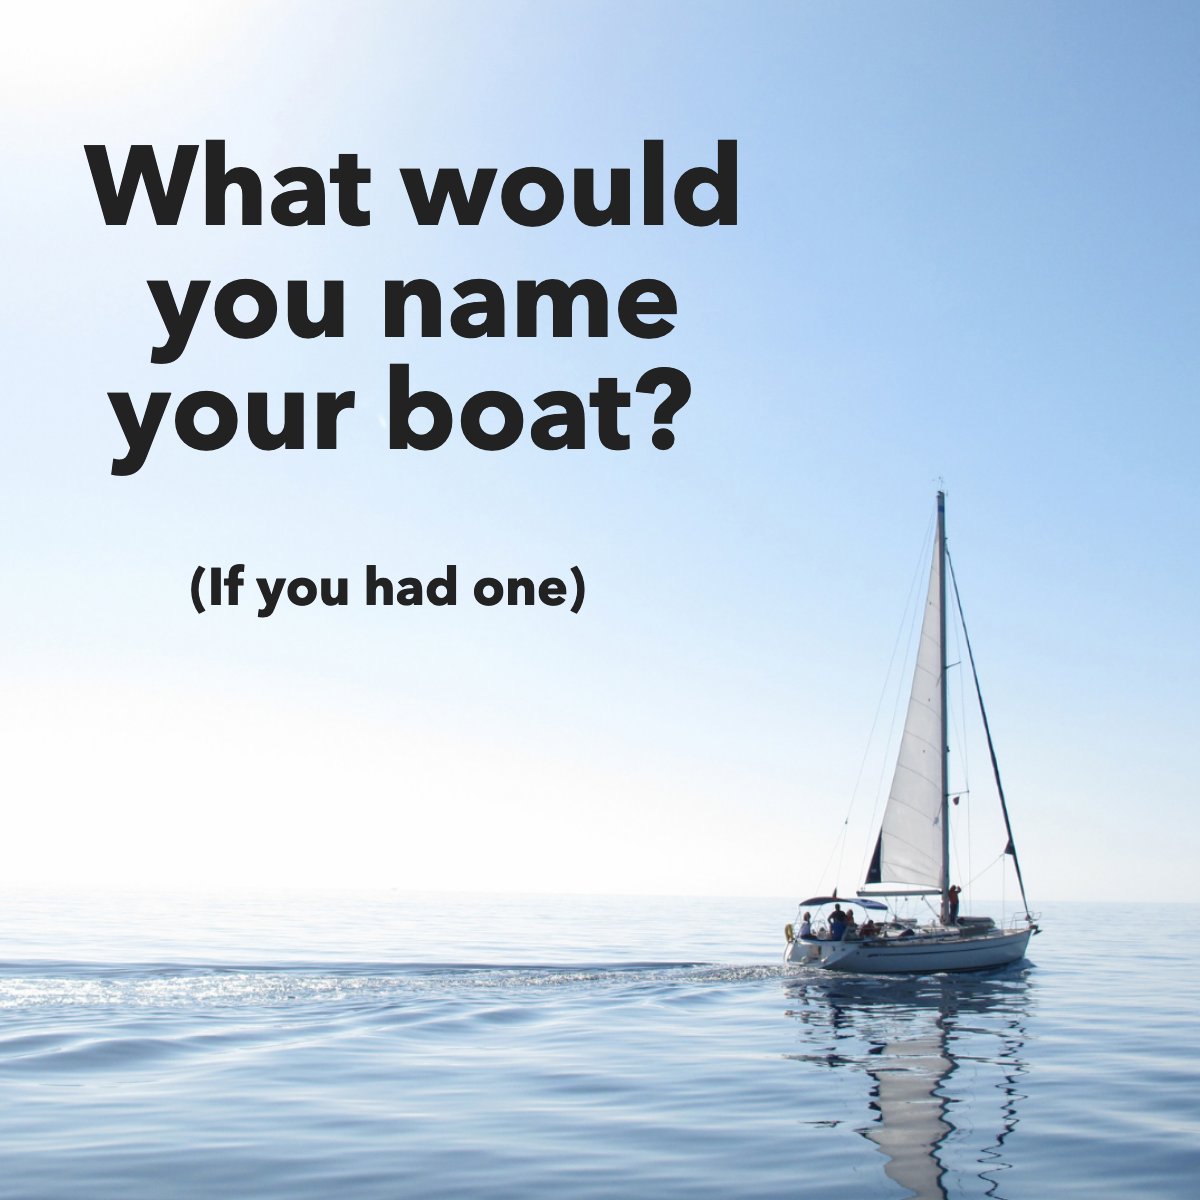 Naming boats after famous songs, movies, or other cultural arts you love is acceptable and entertaining. 😆😉

#boatrip #boatinglife #boats #ocean #searayboats #boatfishing
 #plazarealestateau #plazarealestate